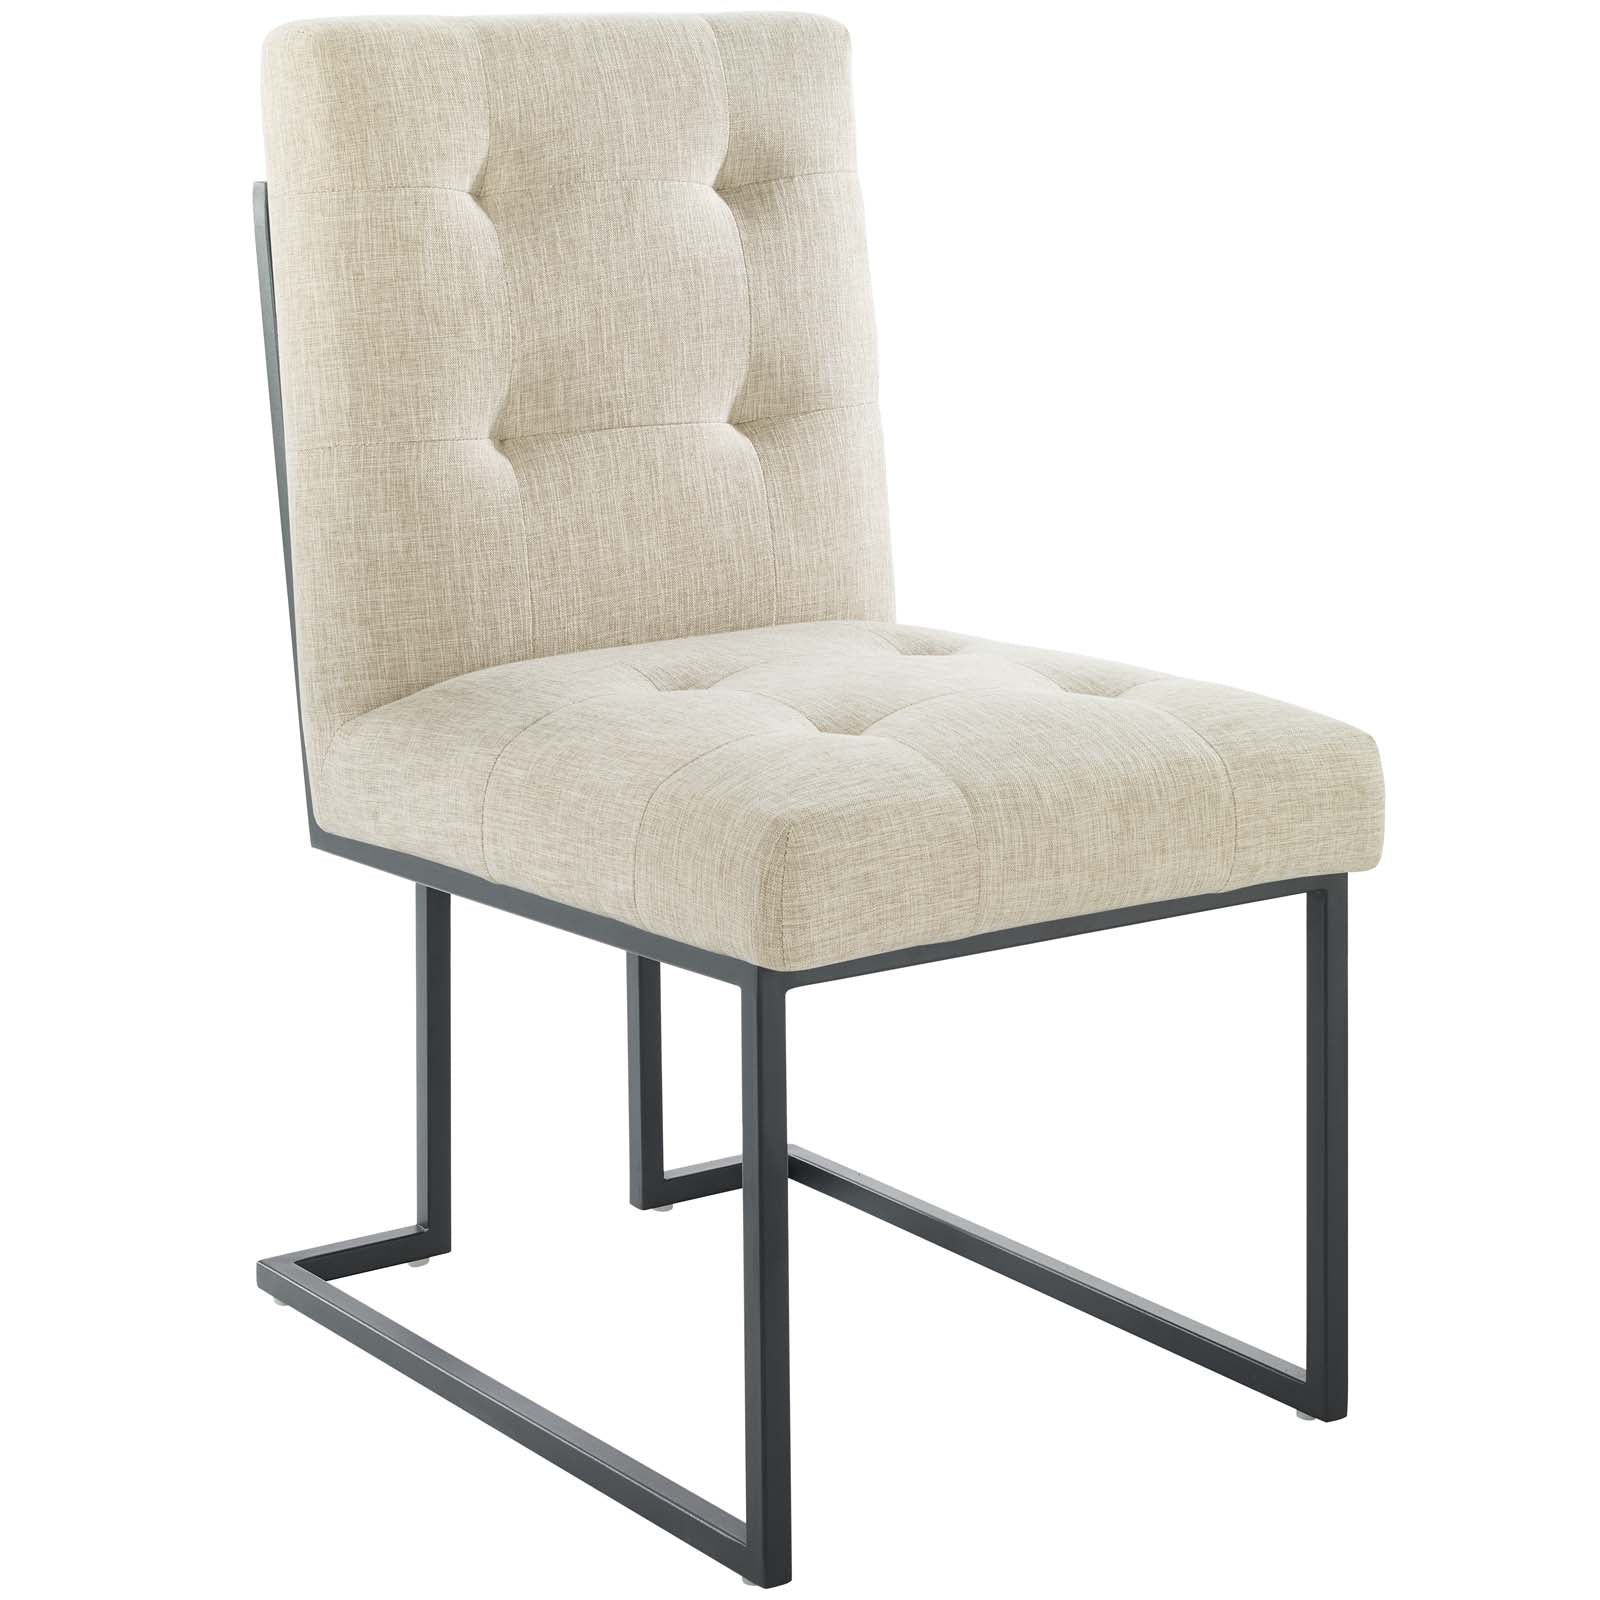 Privy Black Fabric Dining Chair - Beige